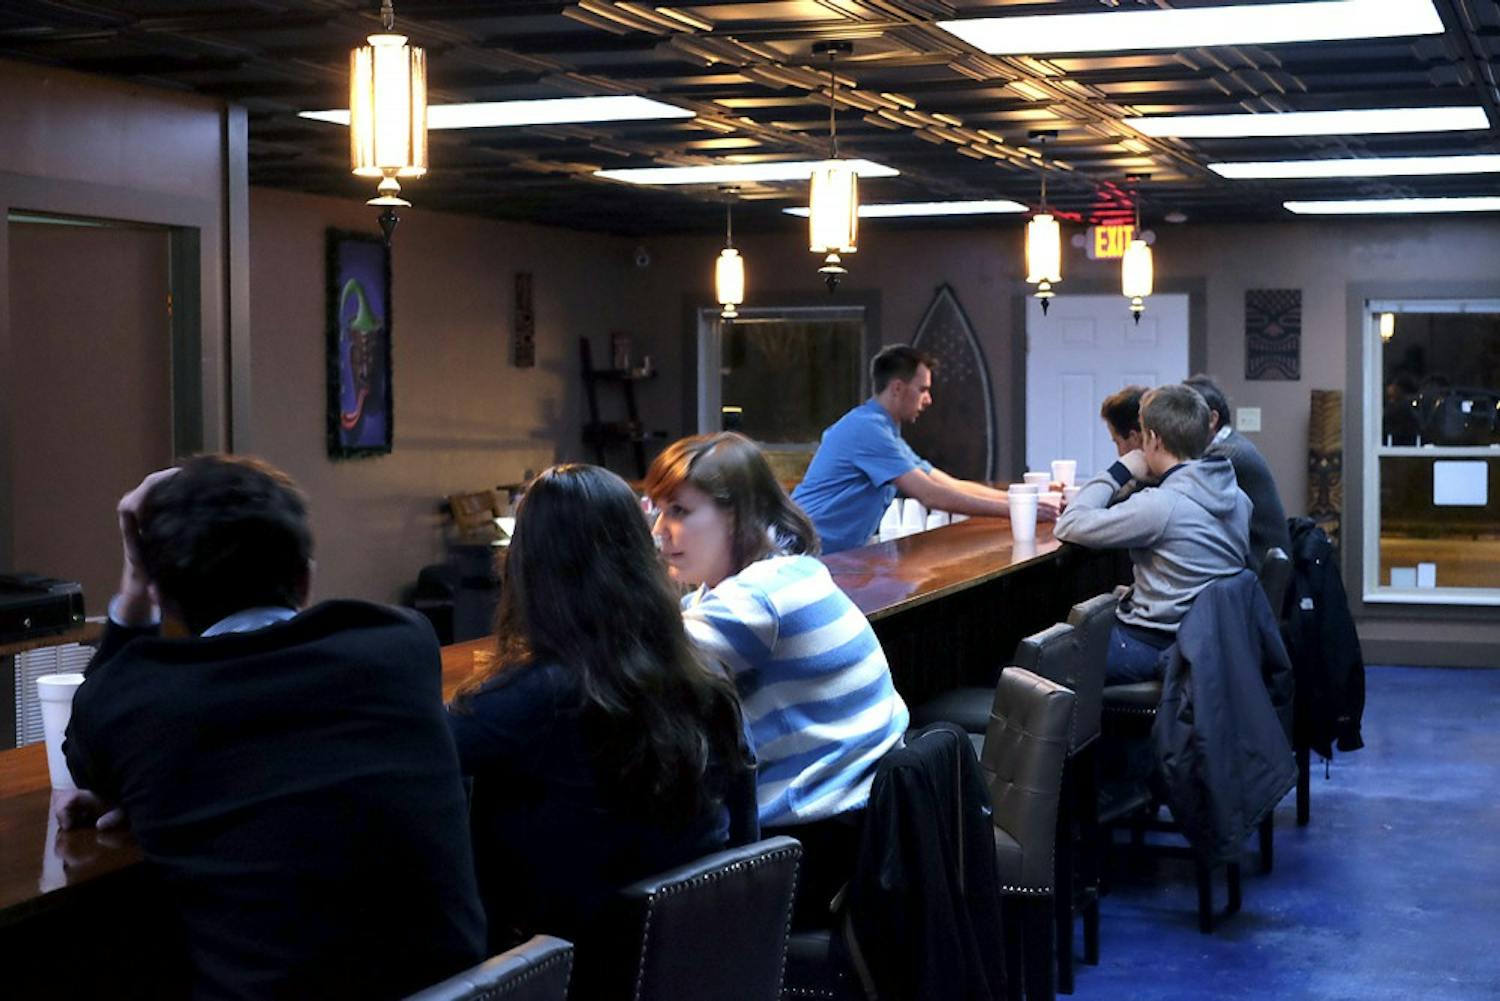 The Krave Kava Bar at 103 Main St. provides an alcohol alternative for anyone 18 and older.